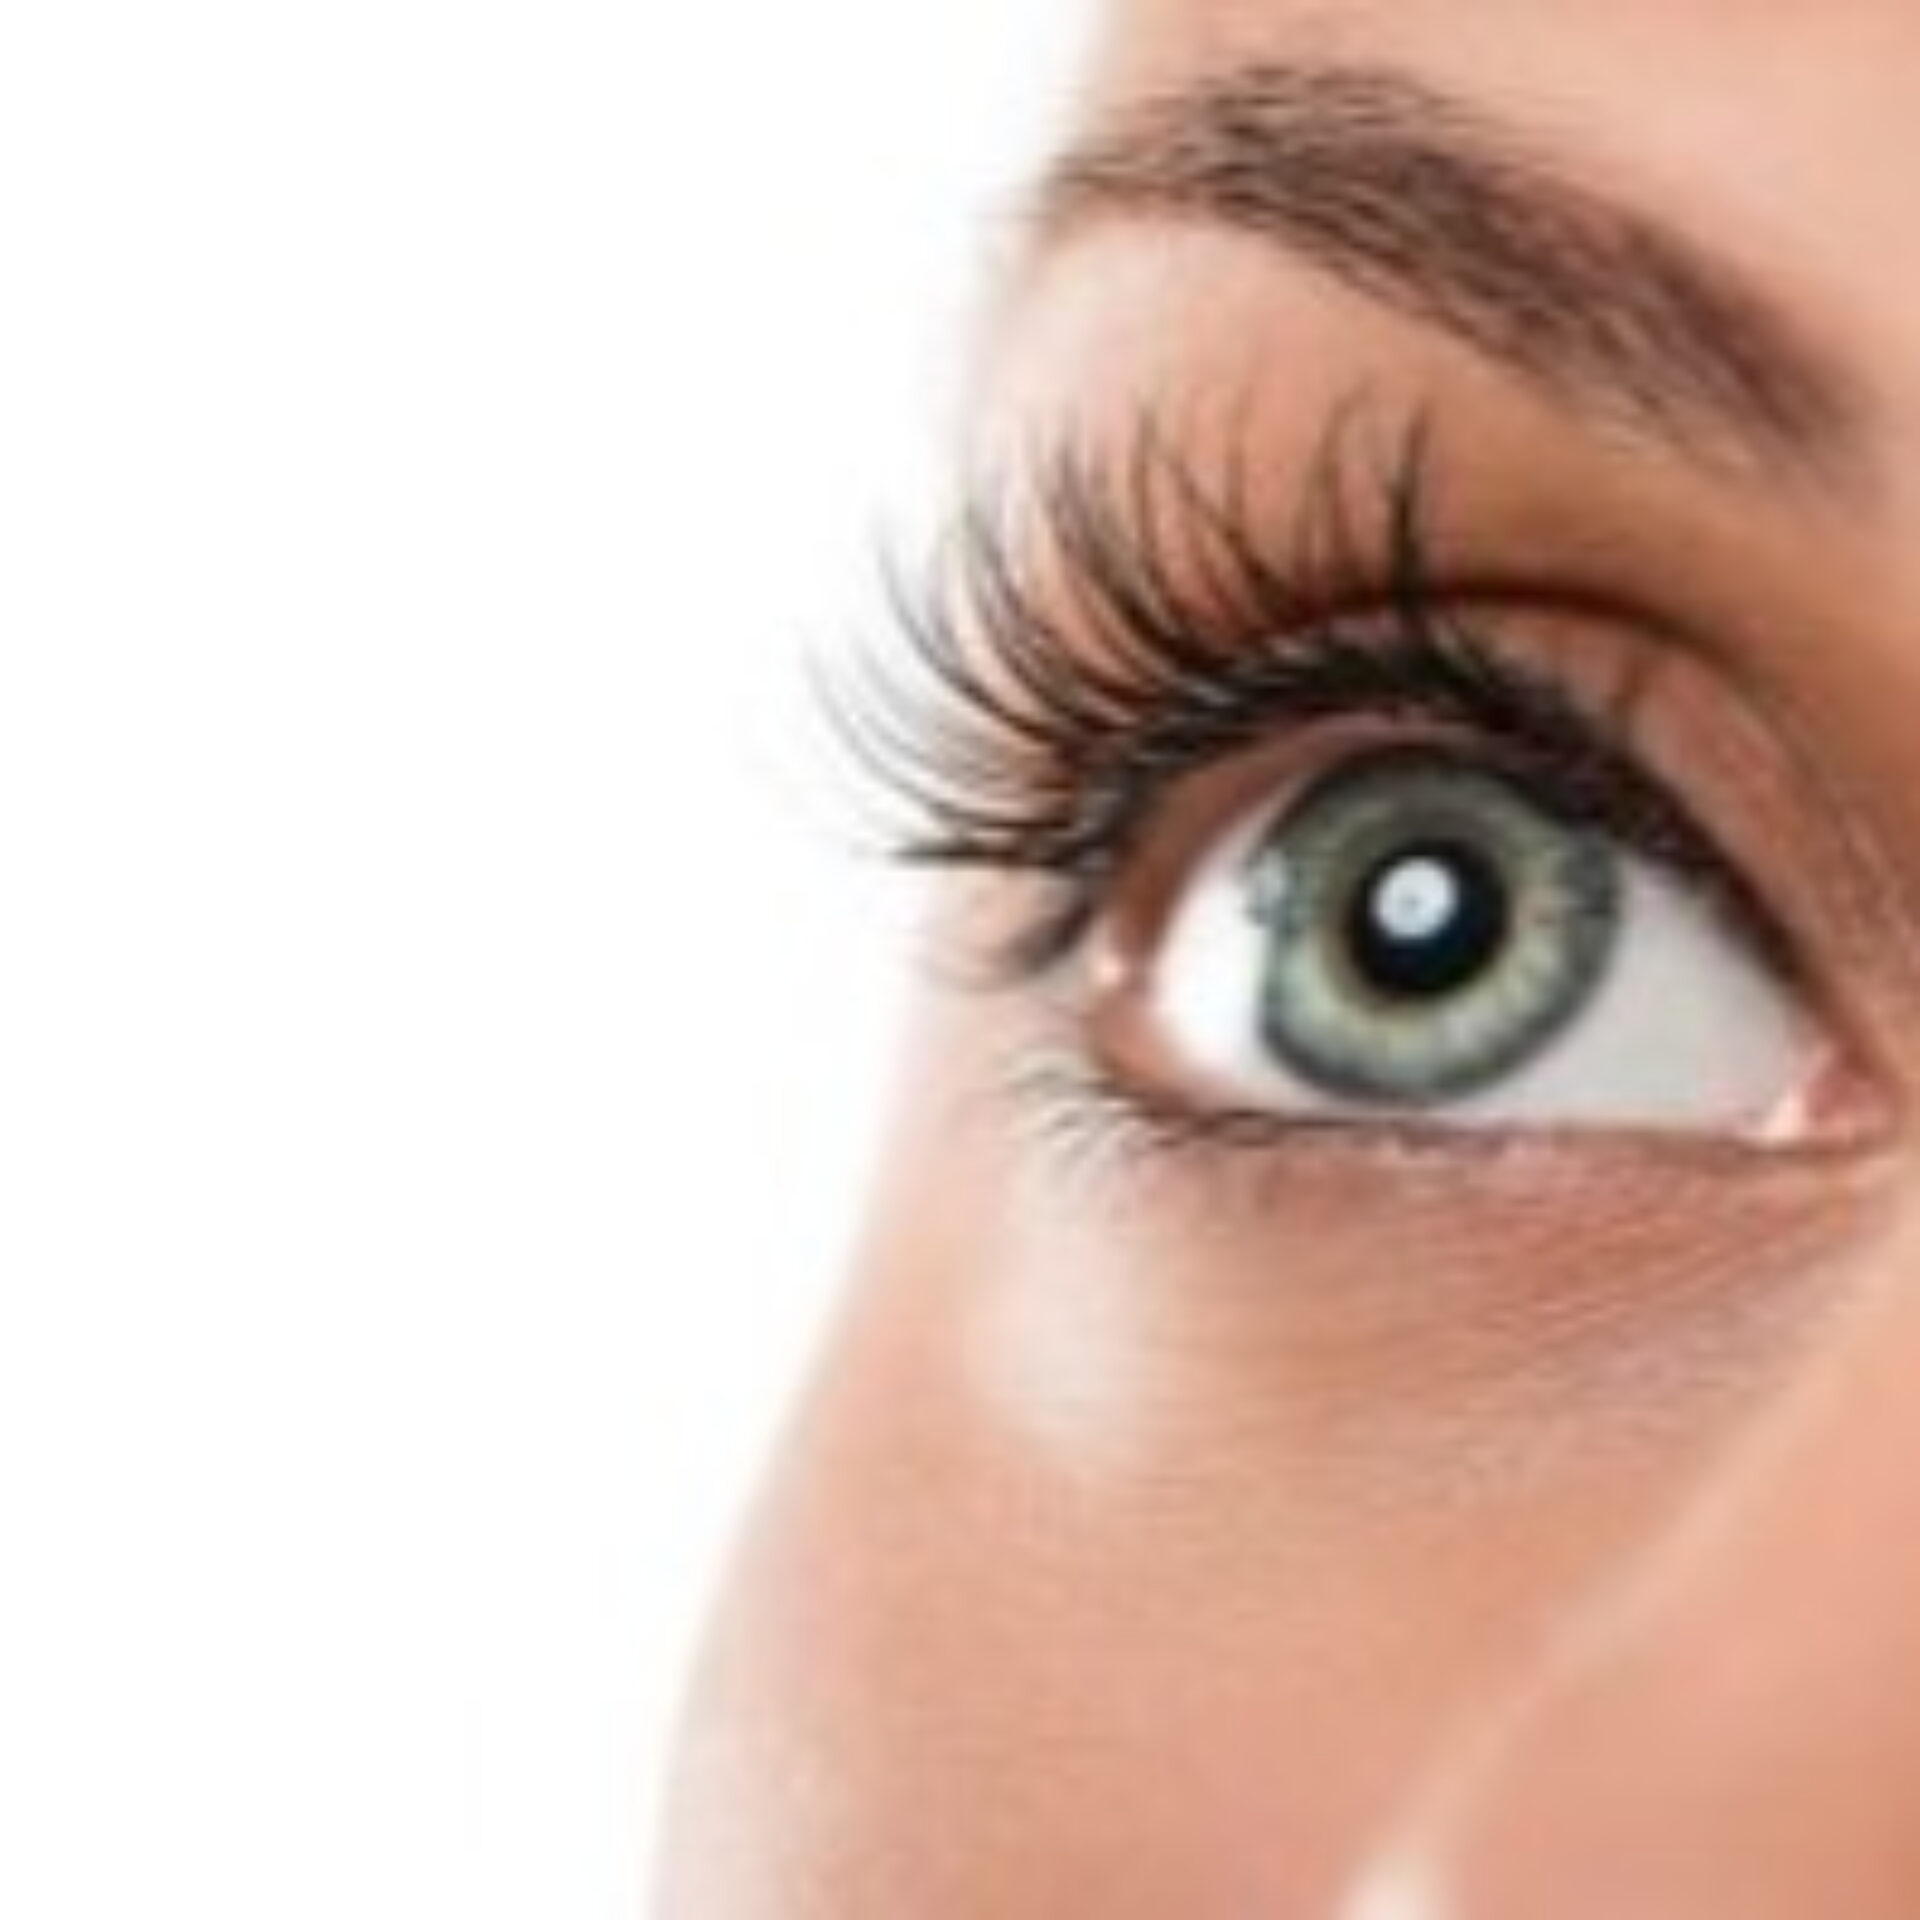 Lash & Brow Services At Muse Hair & Beauty Salon In Broadway, Worcestershire